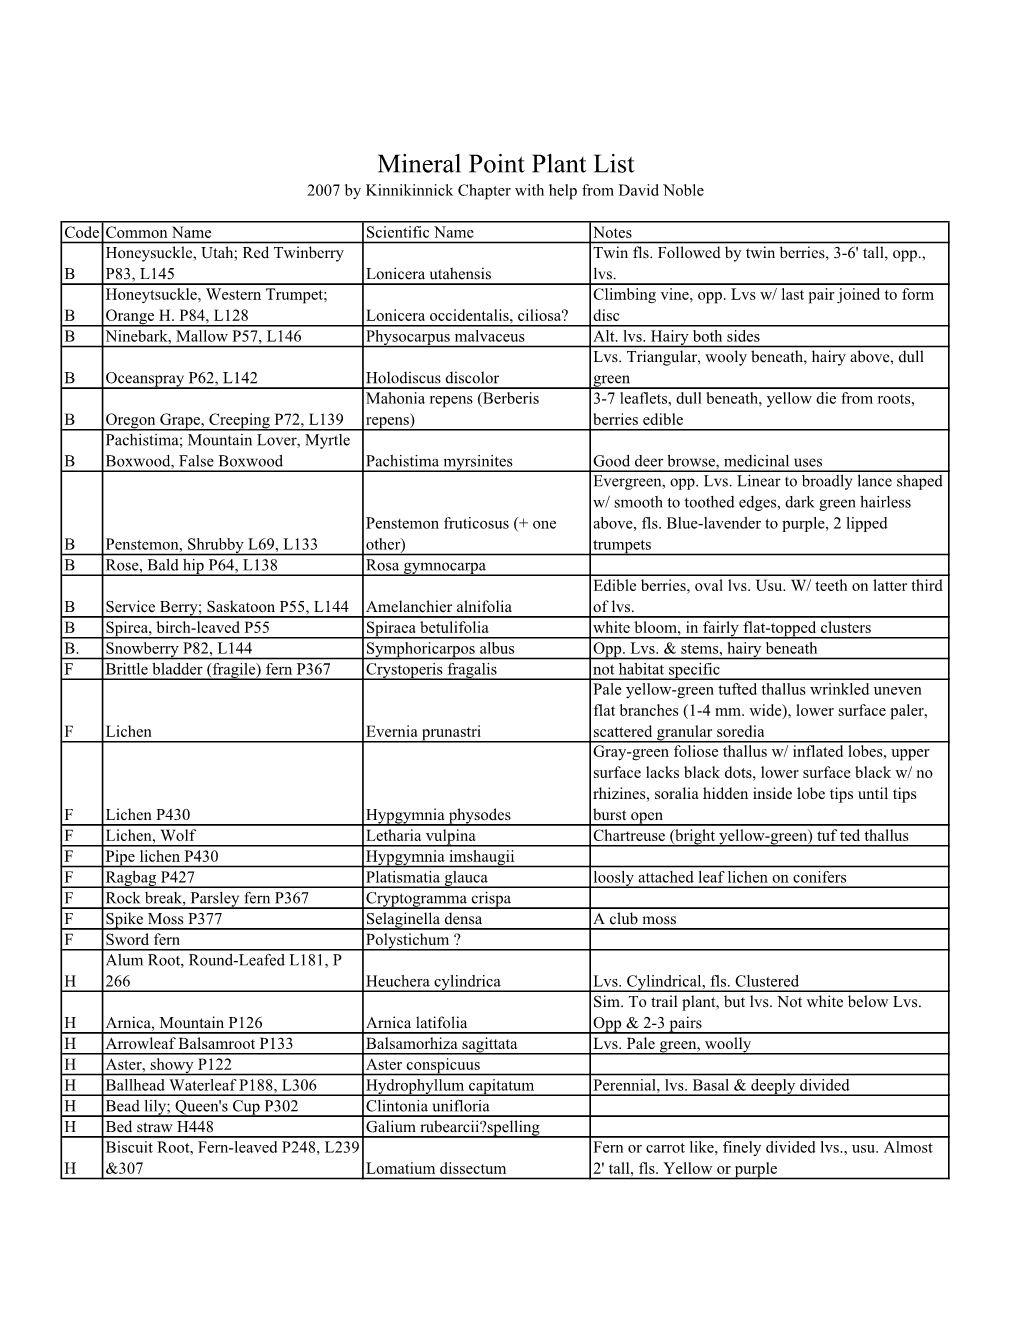 Mineral Point Plant List 2007 by Kinnikinnick Chapter with Help from David Noble